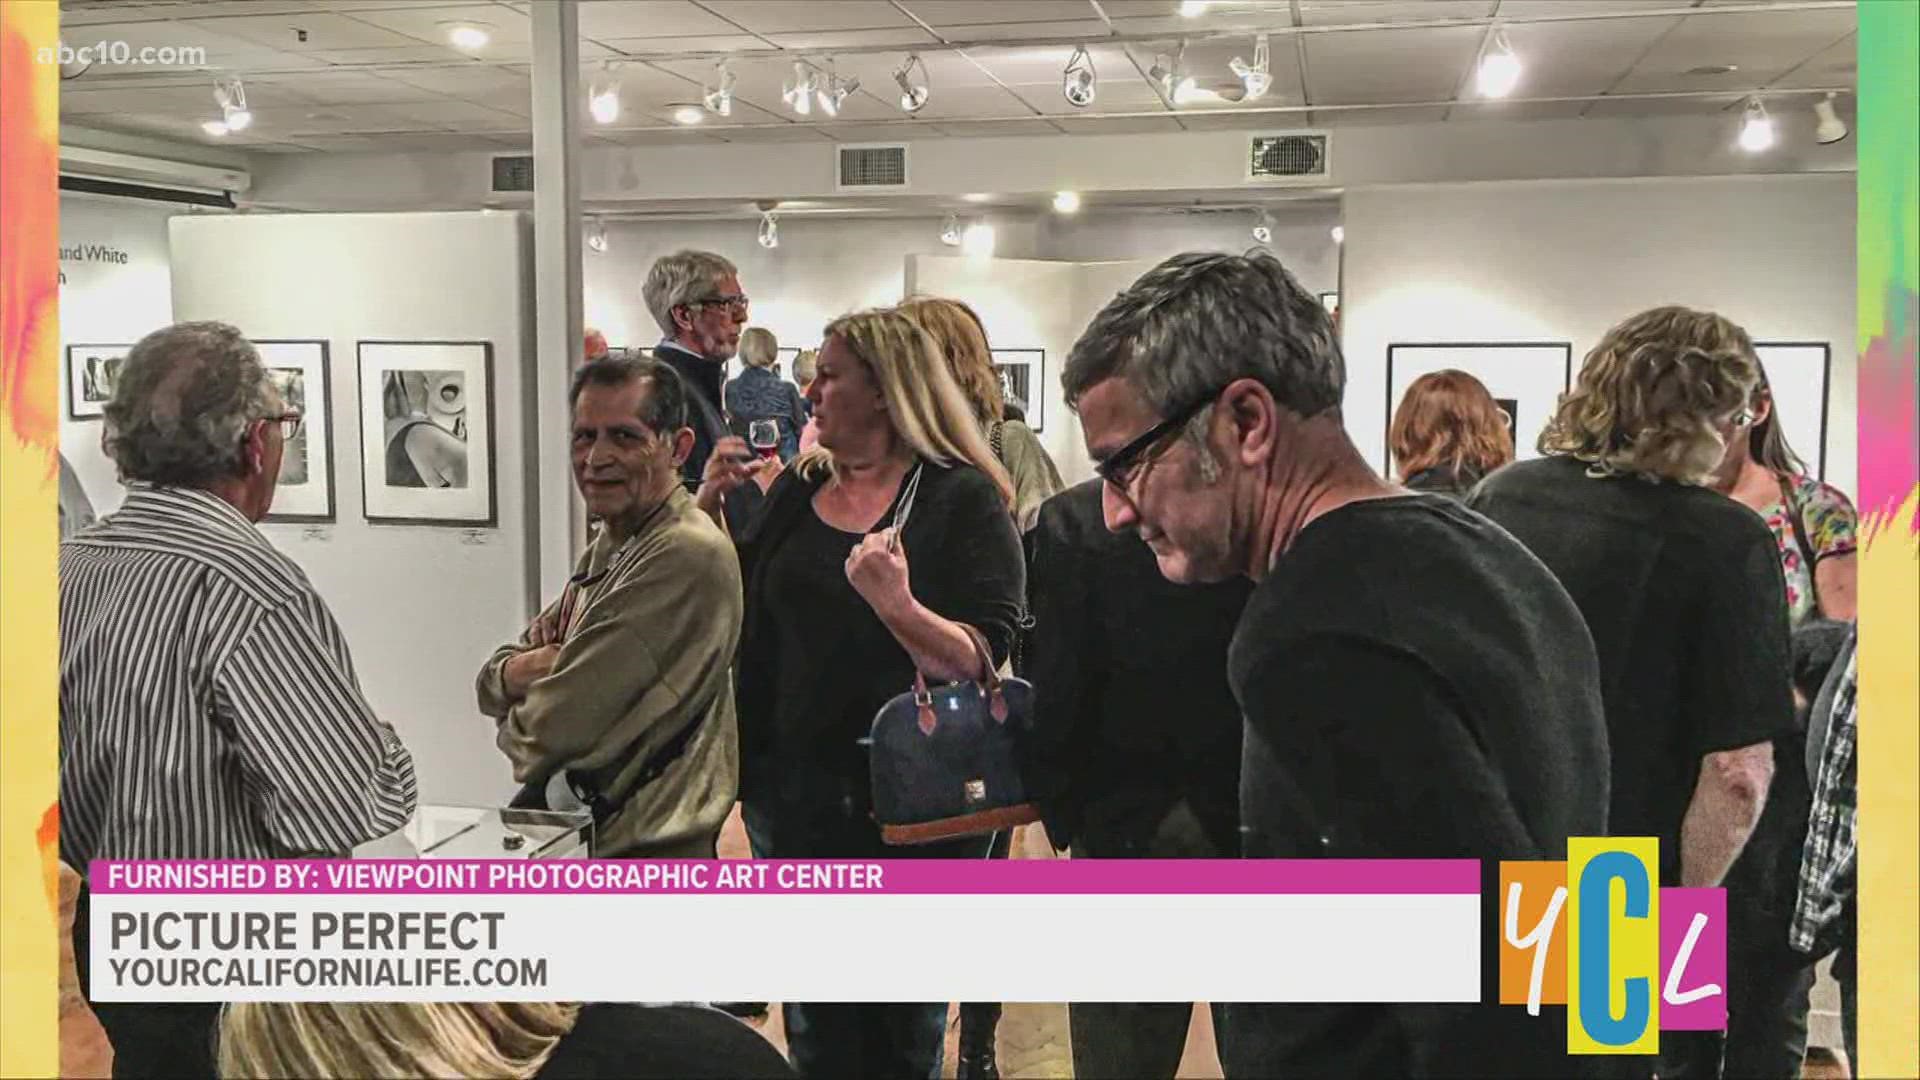 Biennial celebration of the photographic arts offering events and activities that reach across communities and bring people together in the Sacramento region.